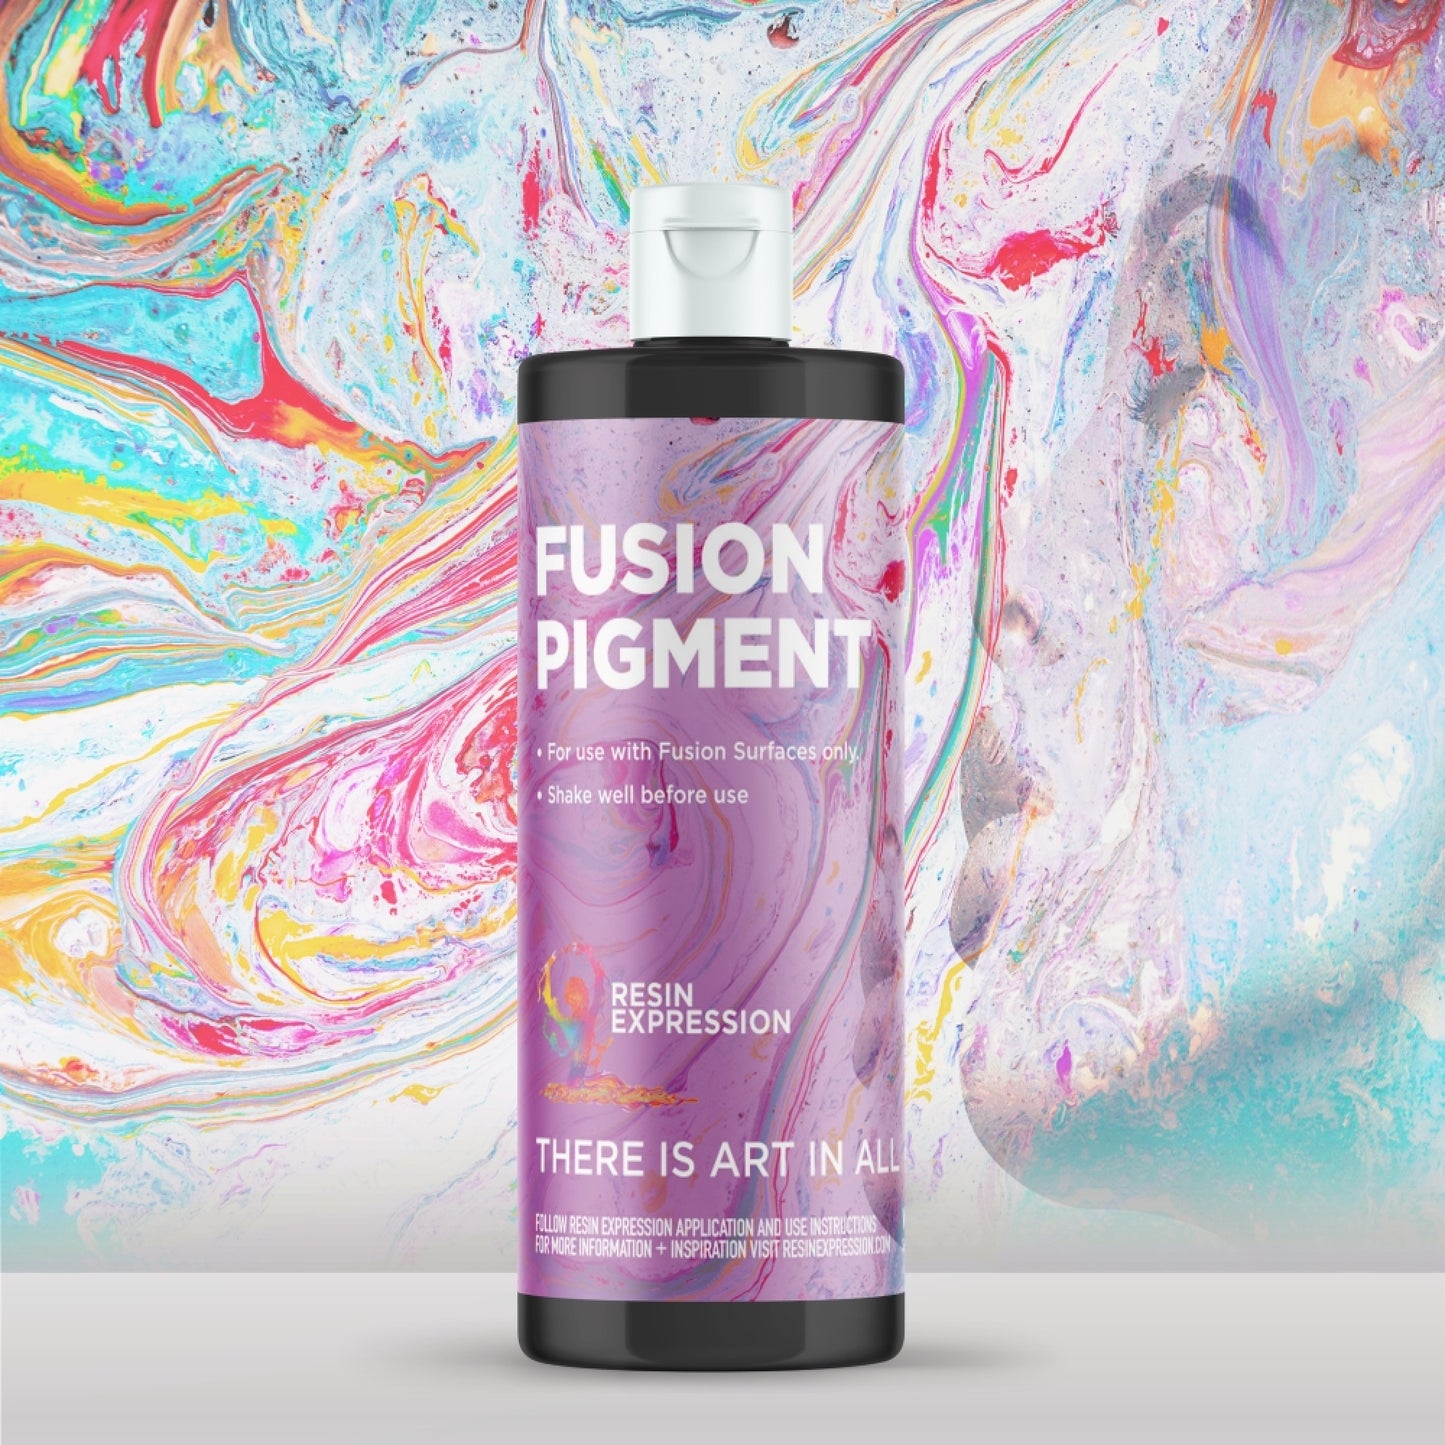 Fusion Pigment Resin Expression